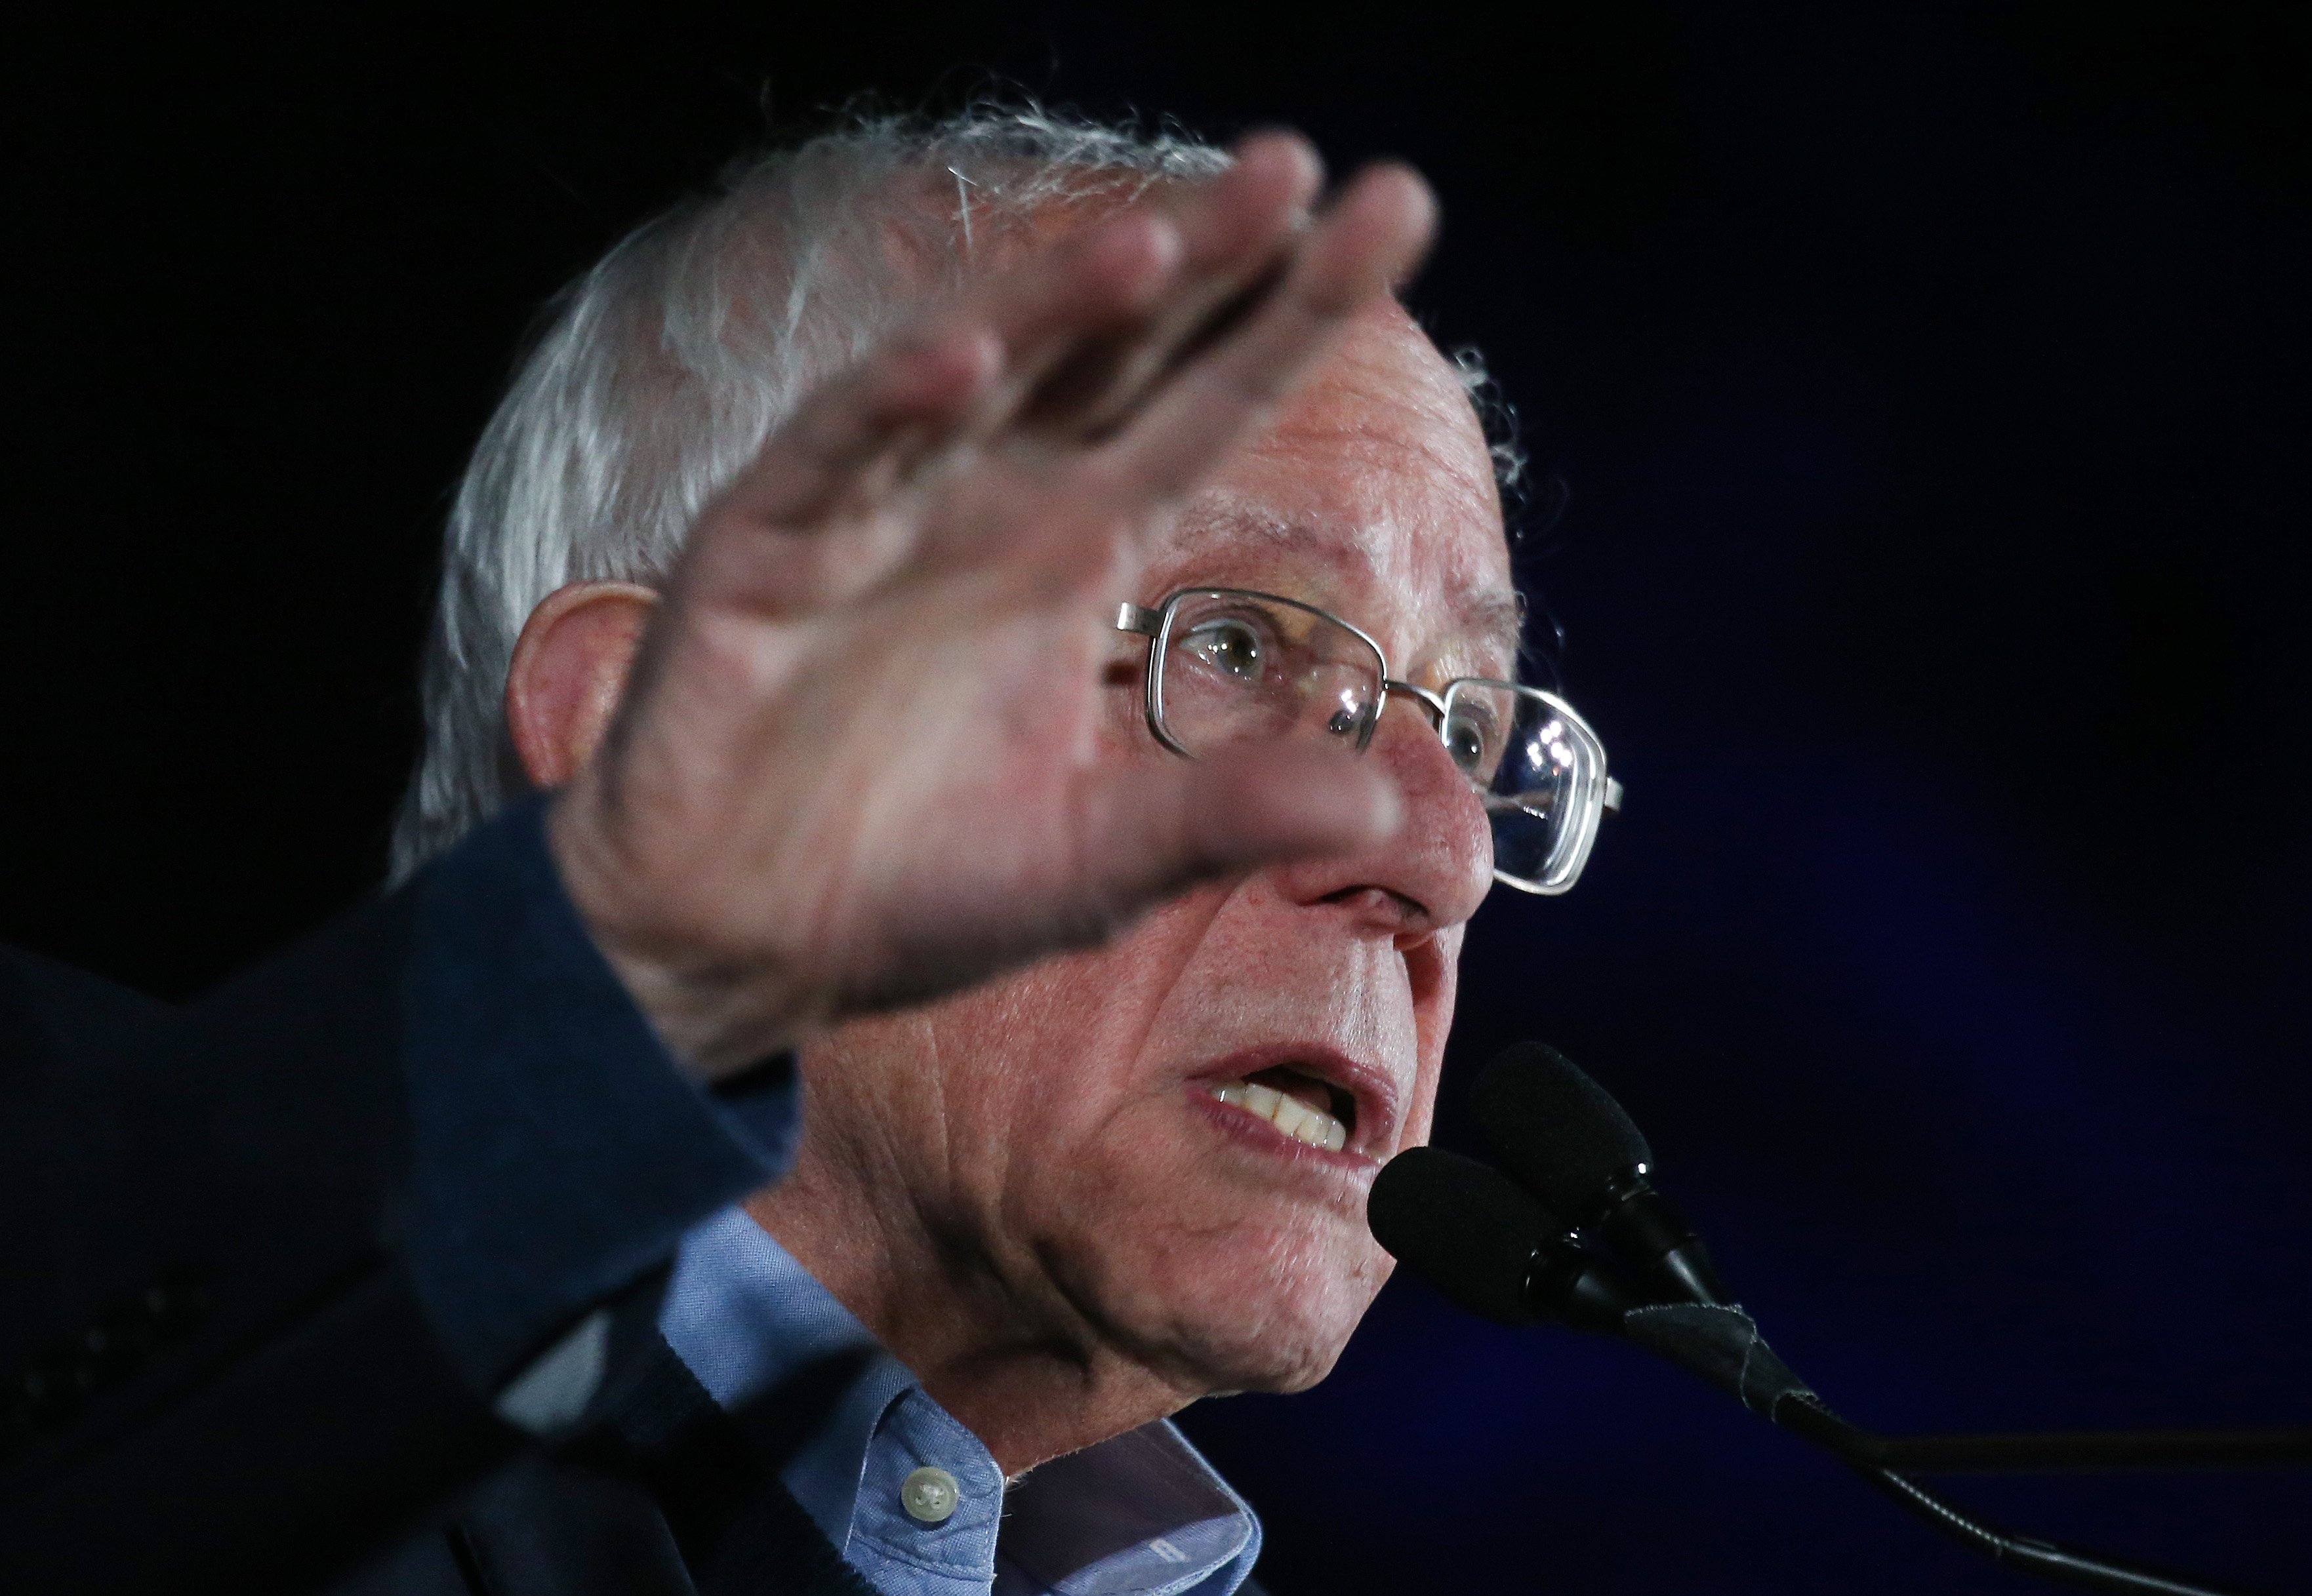 LAS VEGAS, NEVADA - FEBRUARY 21: Democratic presidential candidate Sen. Bernie Sanders (I-VT) speaks to supporters at a campaign rally on February 21, 2020 in Las Vegas, Nevada. The upcoming Nevada Democratic presidential caucus will be held February 22. (Photo by Mario Tama/Getty Images)